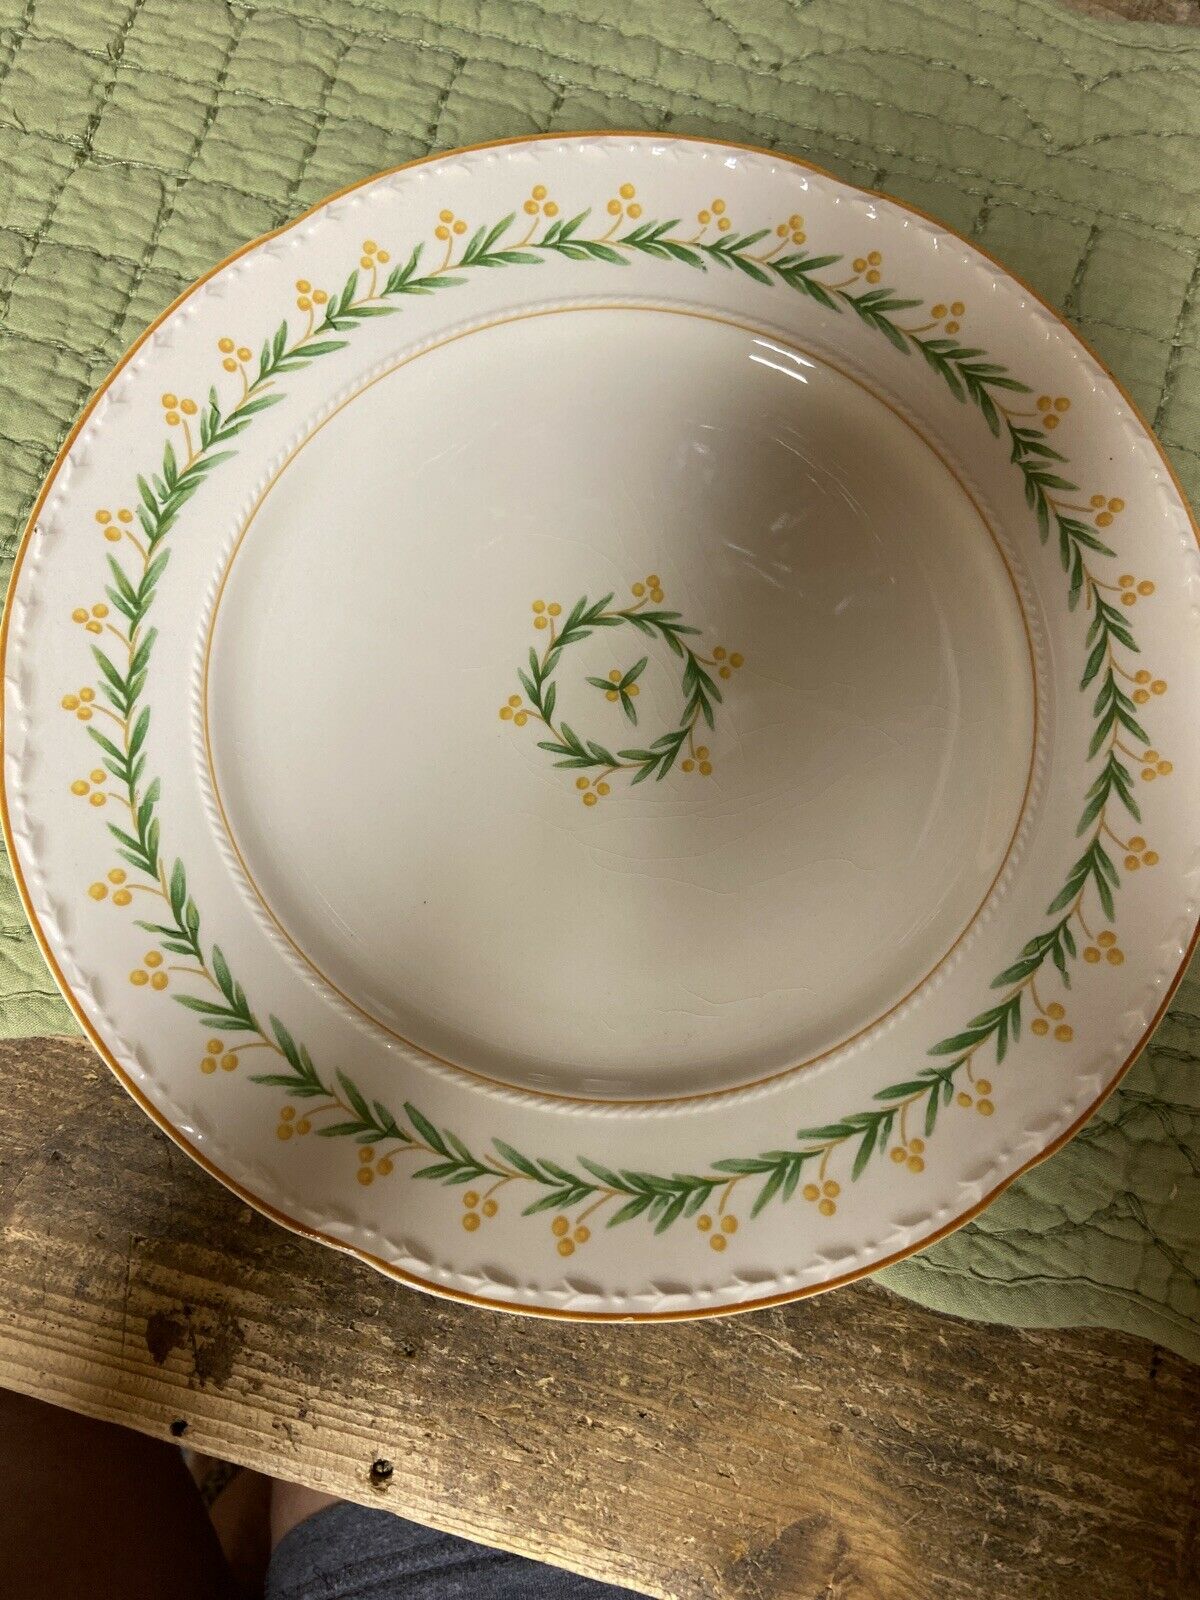 Crook & Ville China (lot 4) With Oval Server Plate